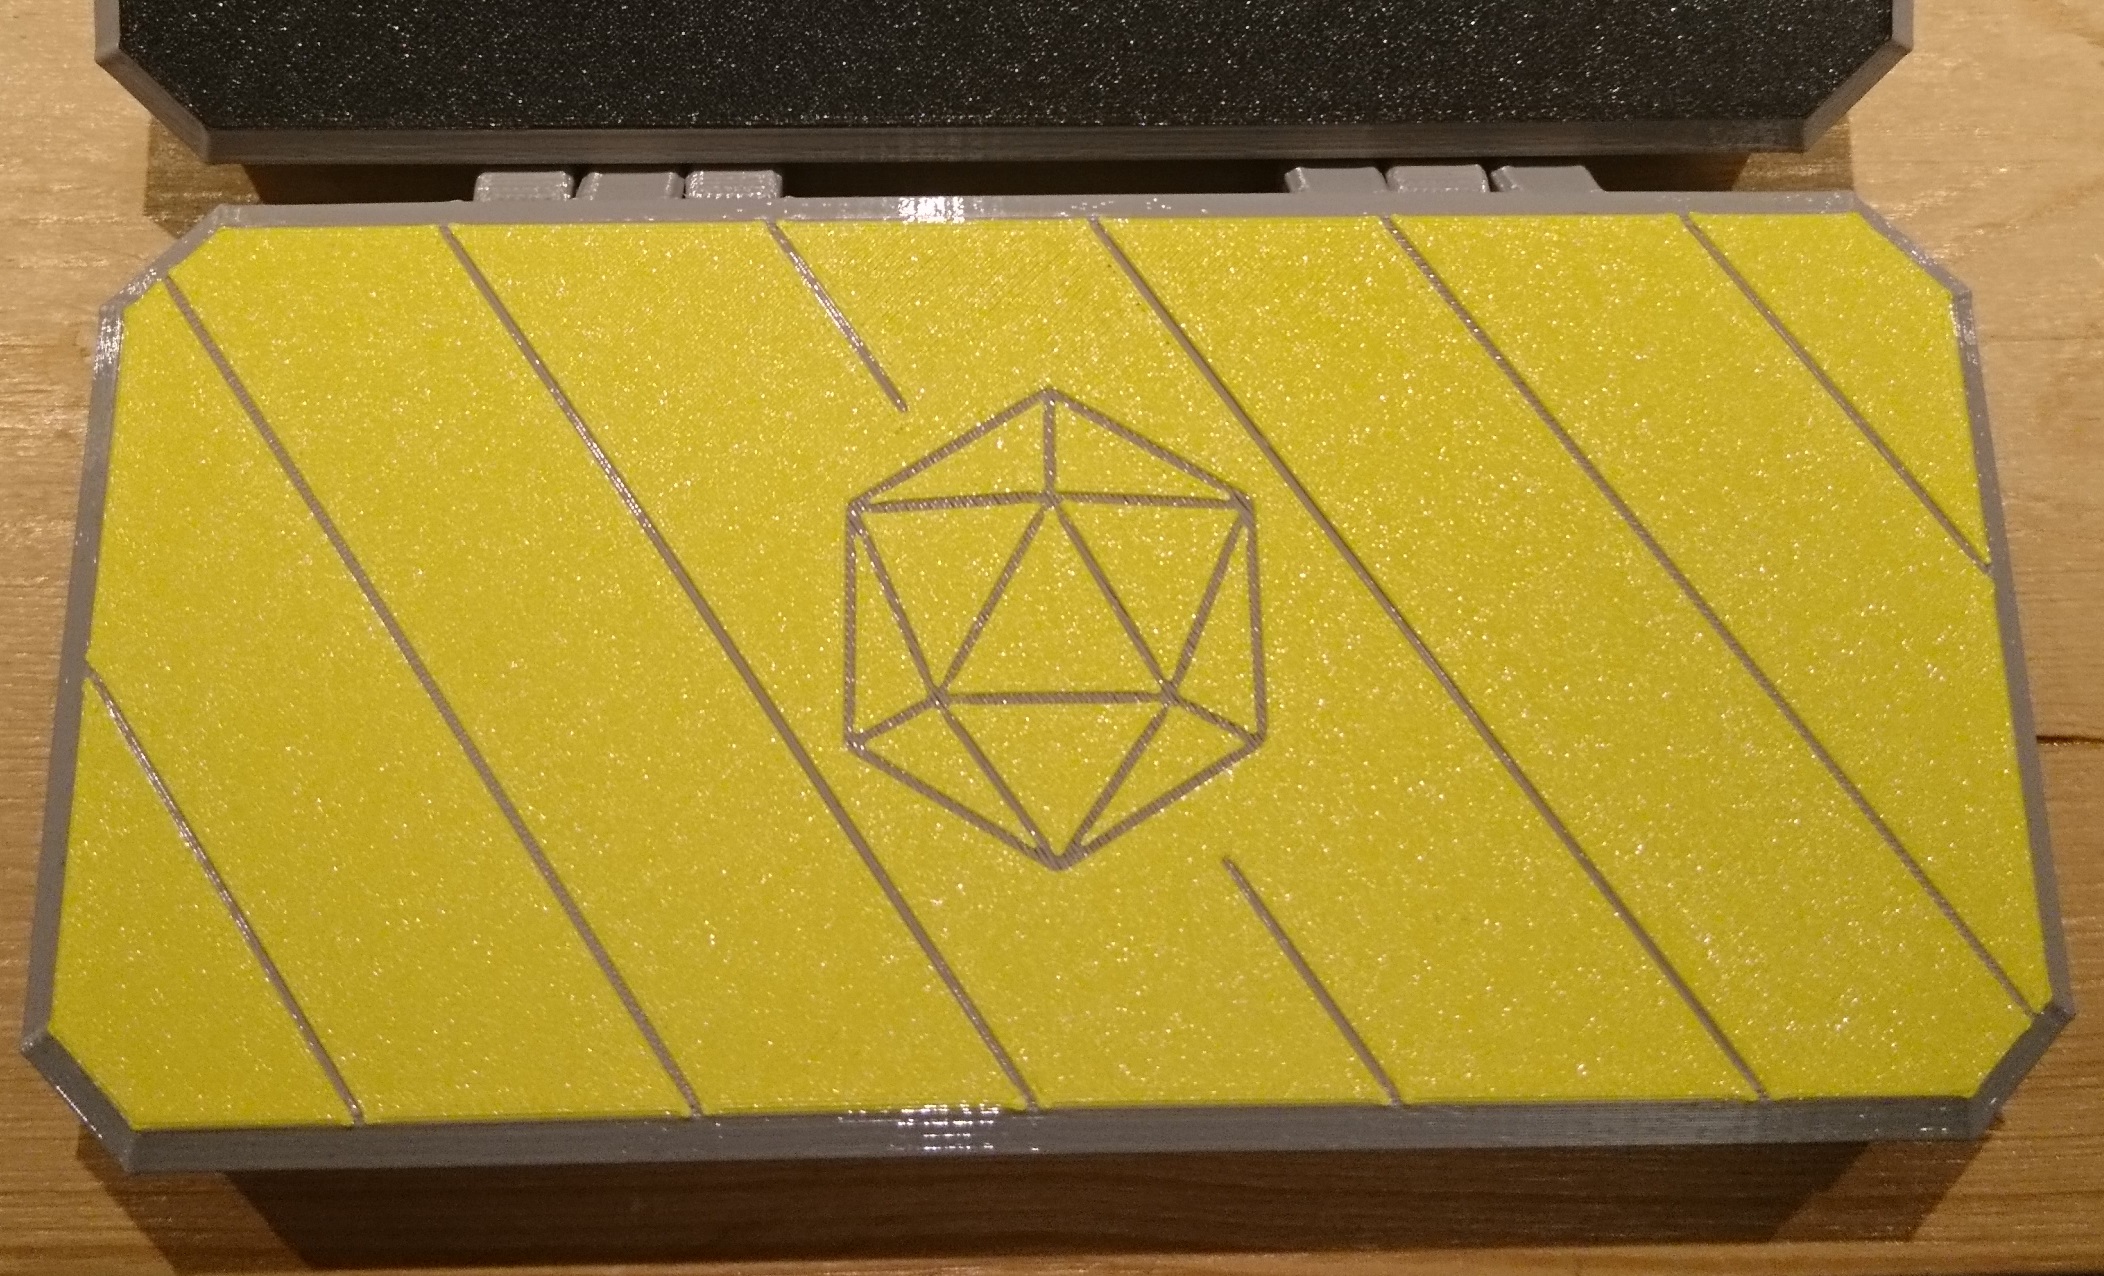 Every Day Dice Carry (EDDC) Box "d20"